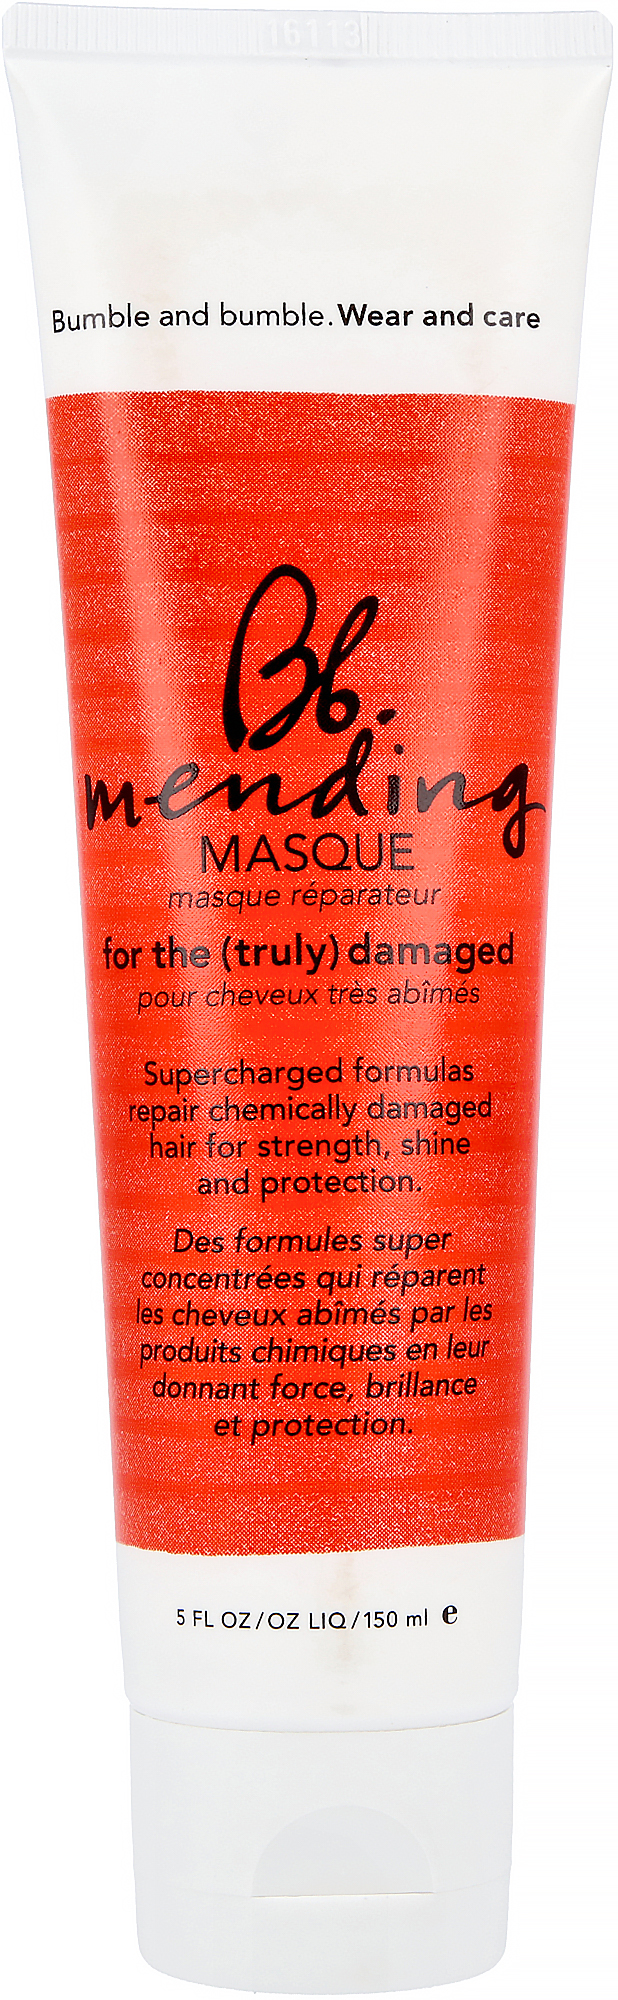 Bumble and bumble Medning Masque 150ml